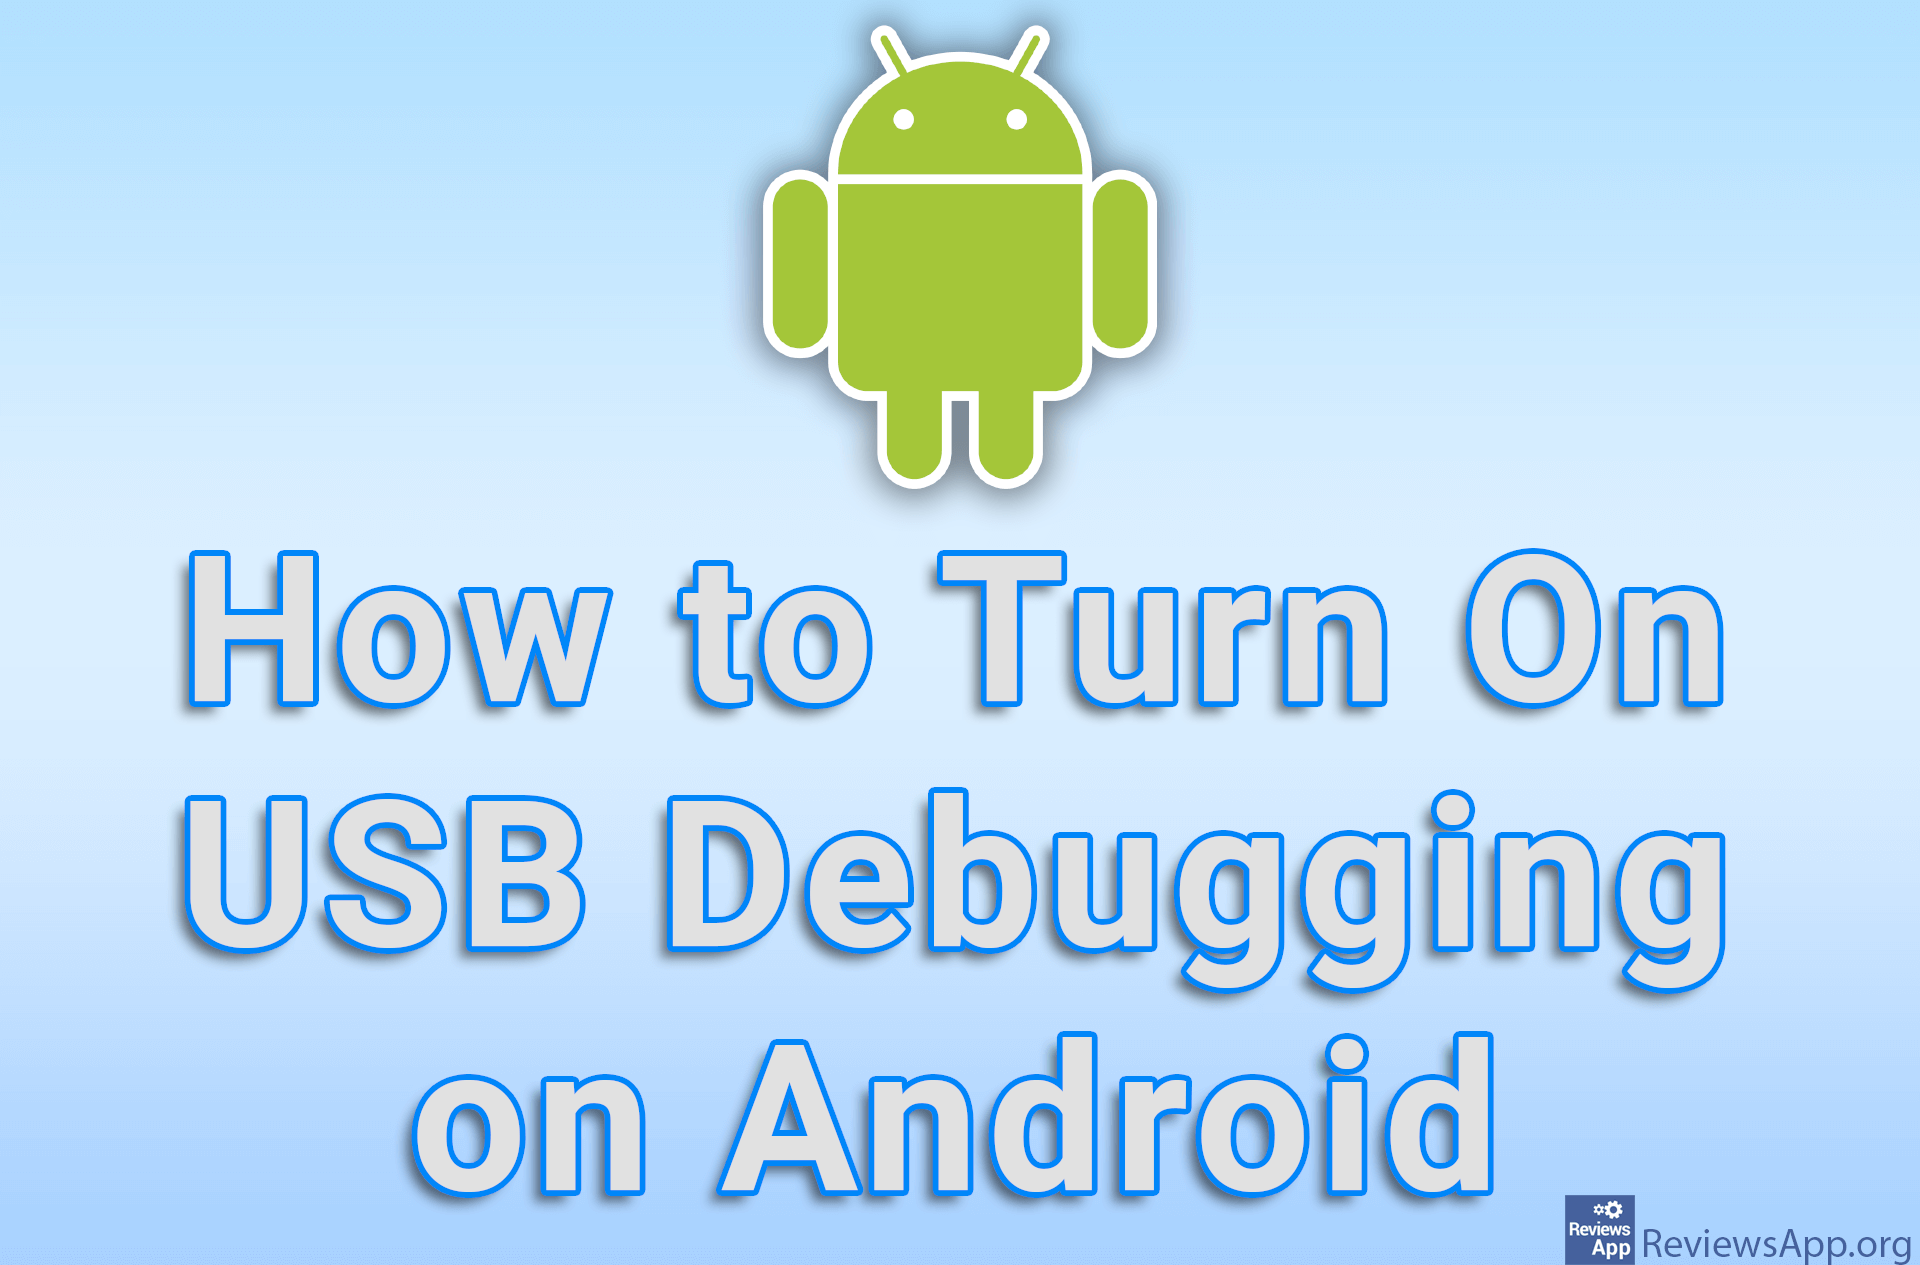 How to Turn On USB Debugging on Android